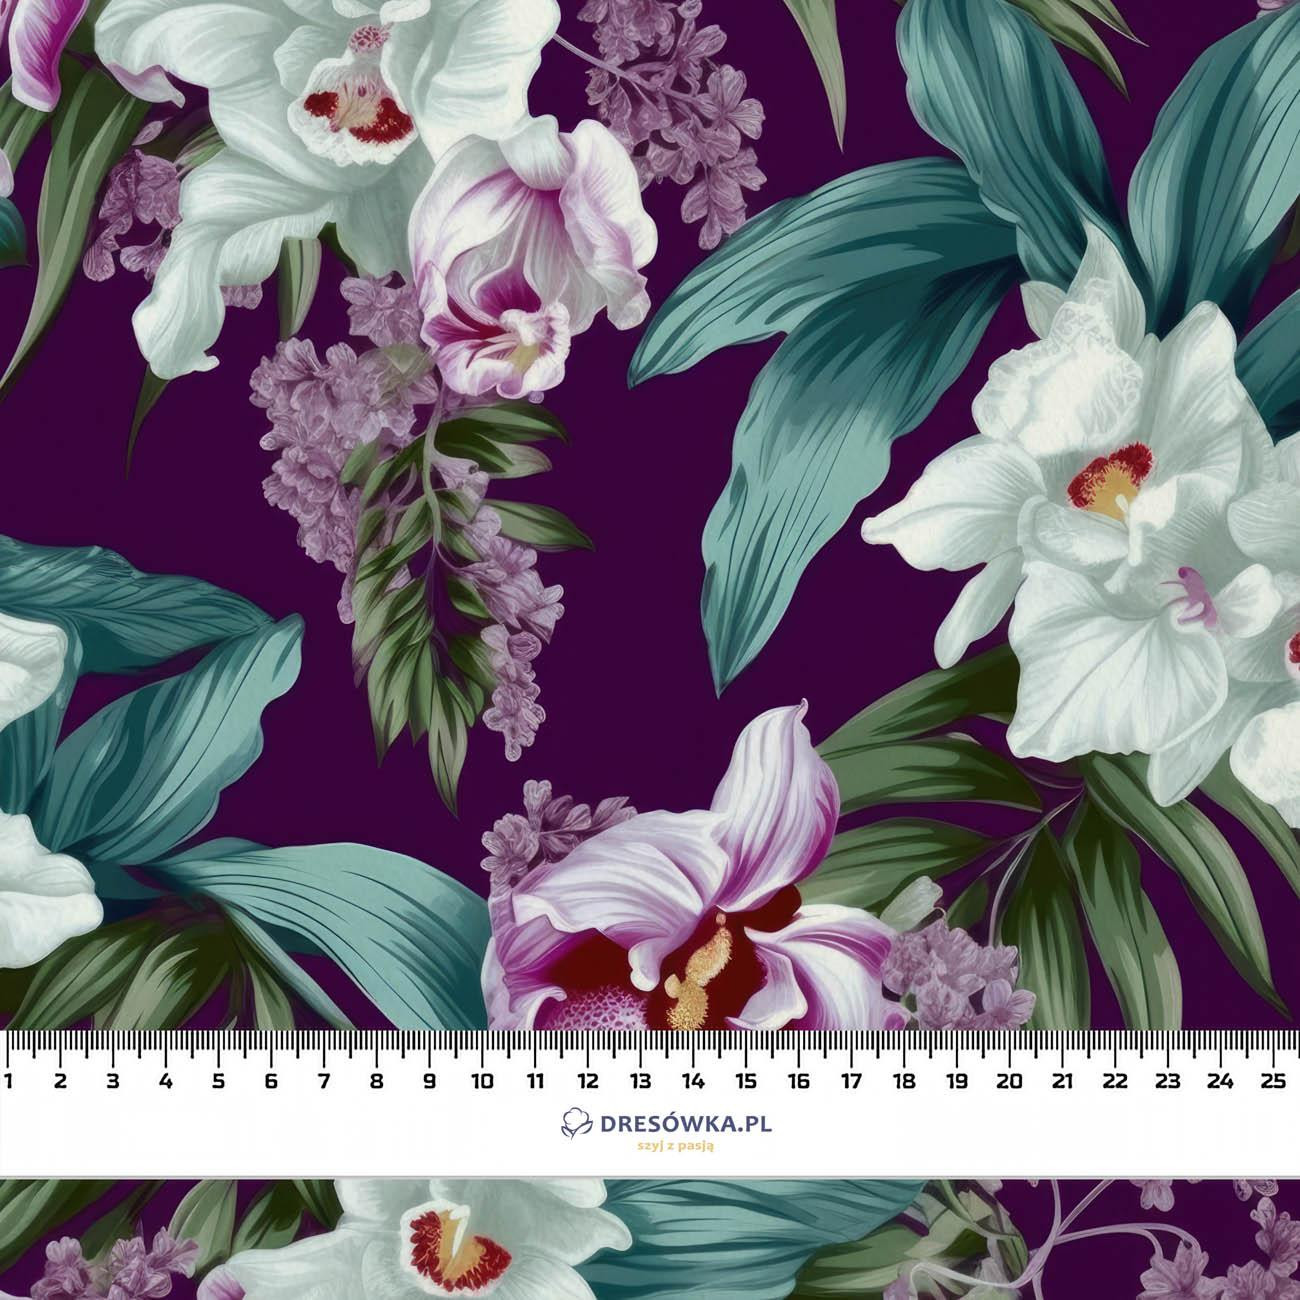 EXOTIC ORCHIDS PAT. 4 - Waterproof woven fabric